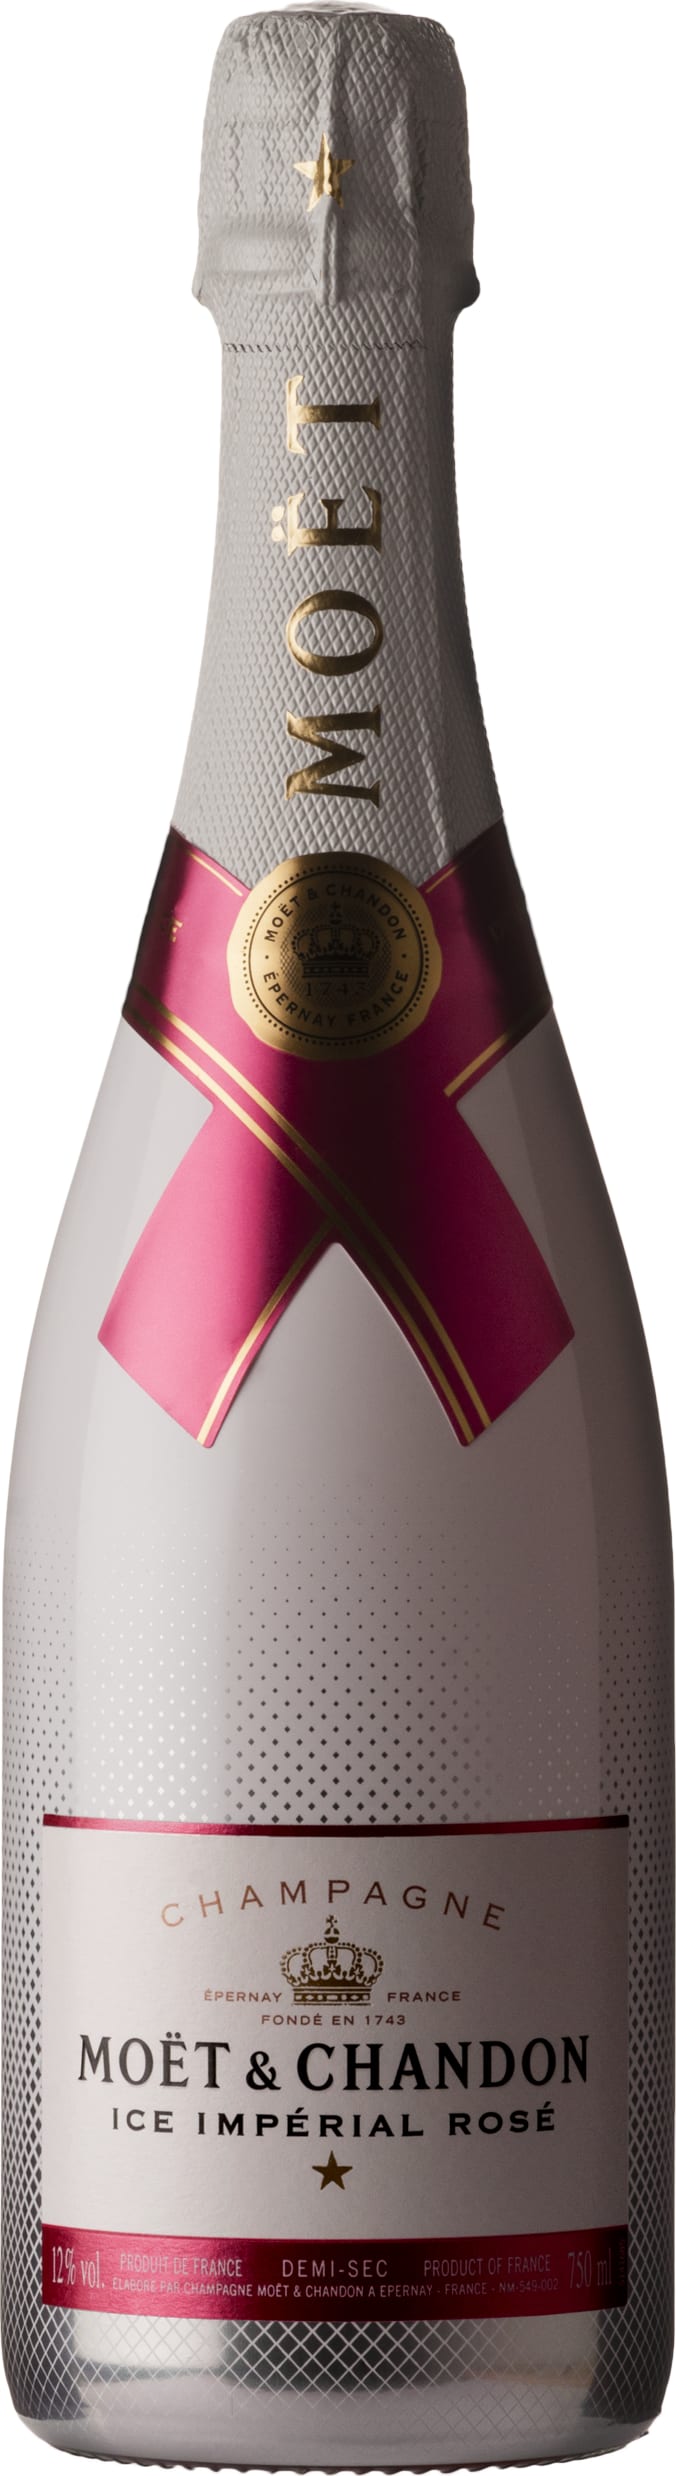 Moet and Chandon Ice Imperial Rose 75cl NV - Buy Moet and Chandon Wines from GREAT WINES DIRECT wine shop